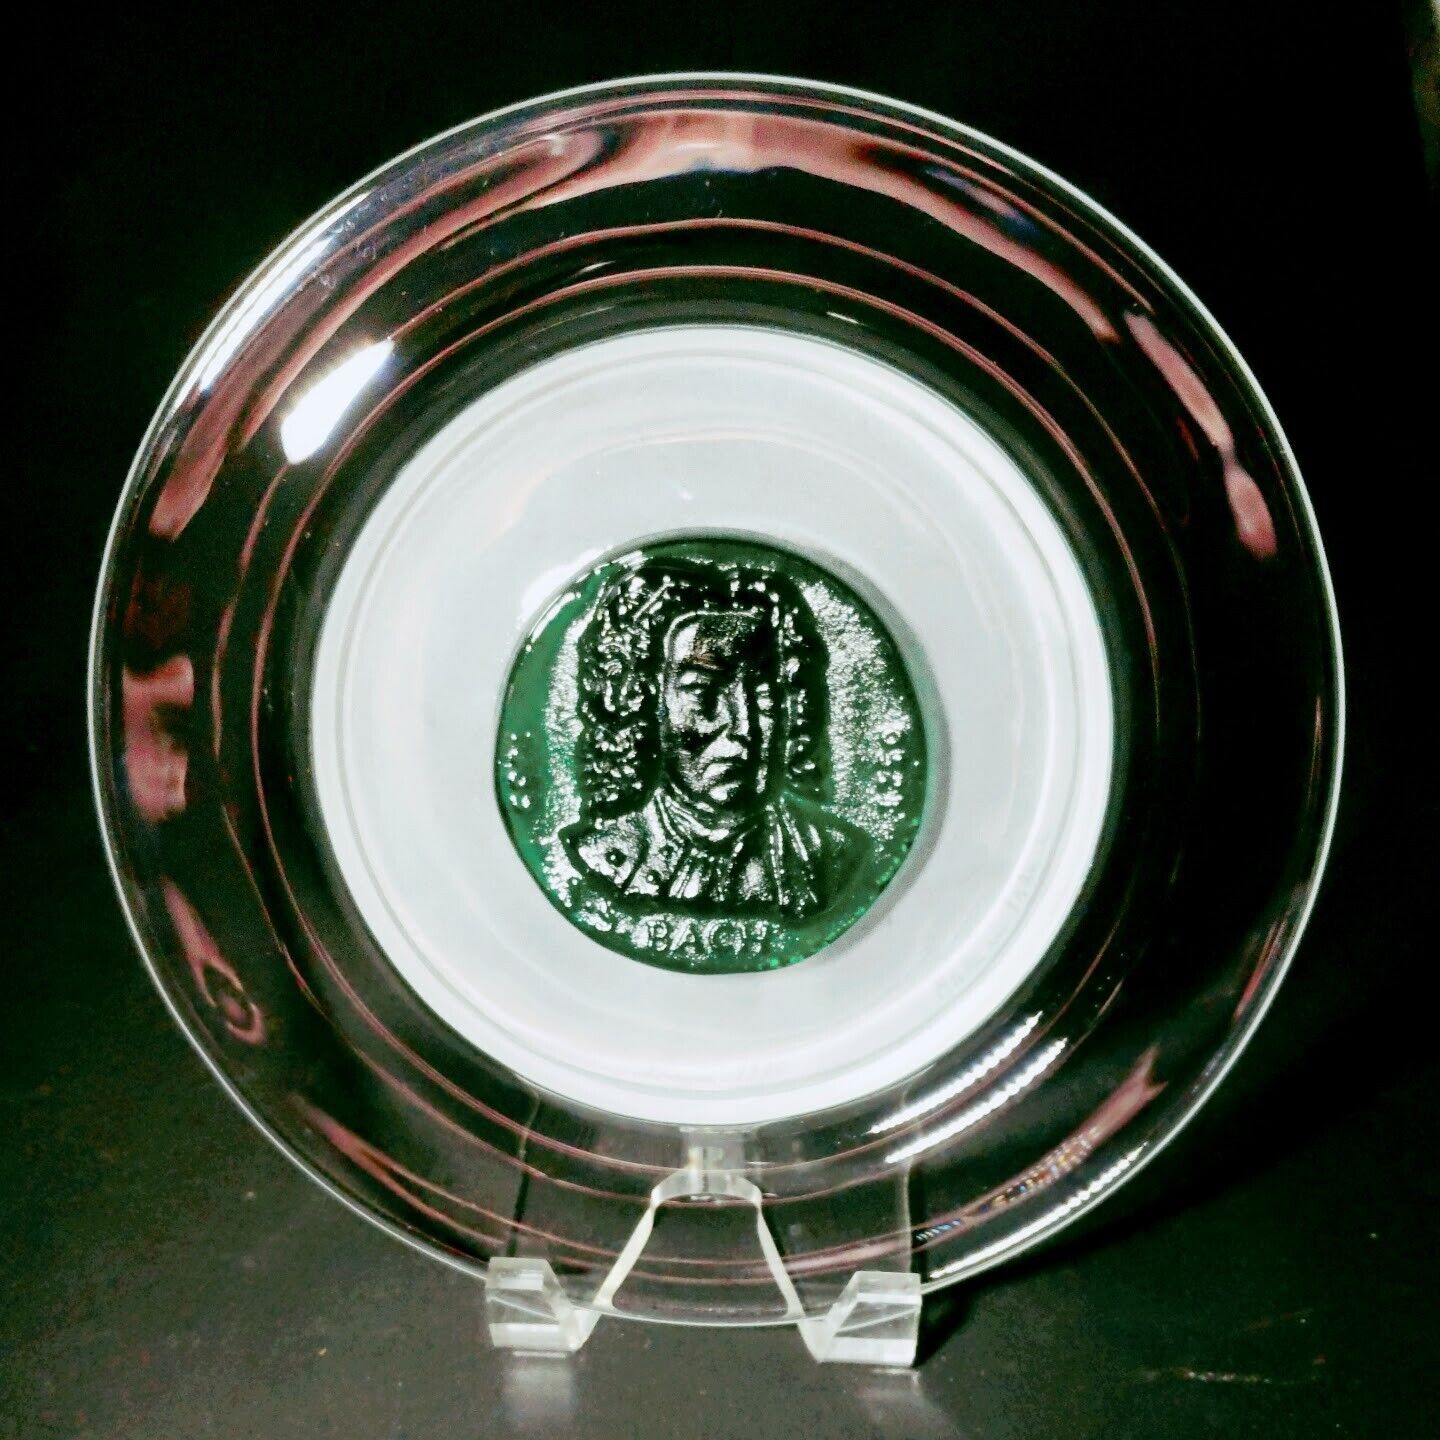 DAUM FRANCE BACH Green Pate de Verre Crystal Plate, Limited Ed #193/2,000